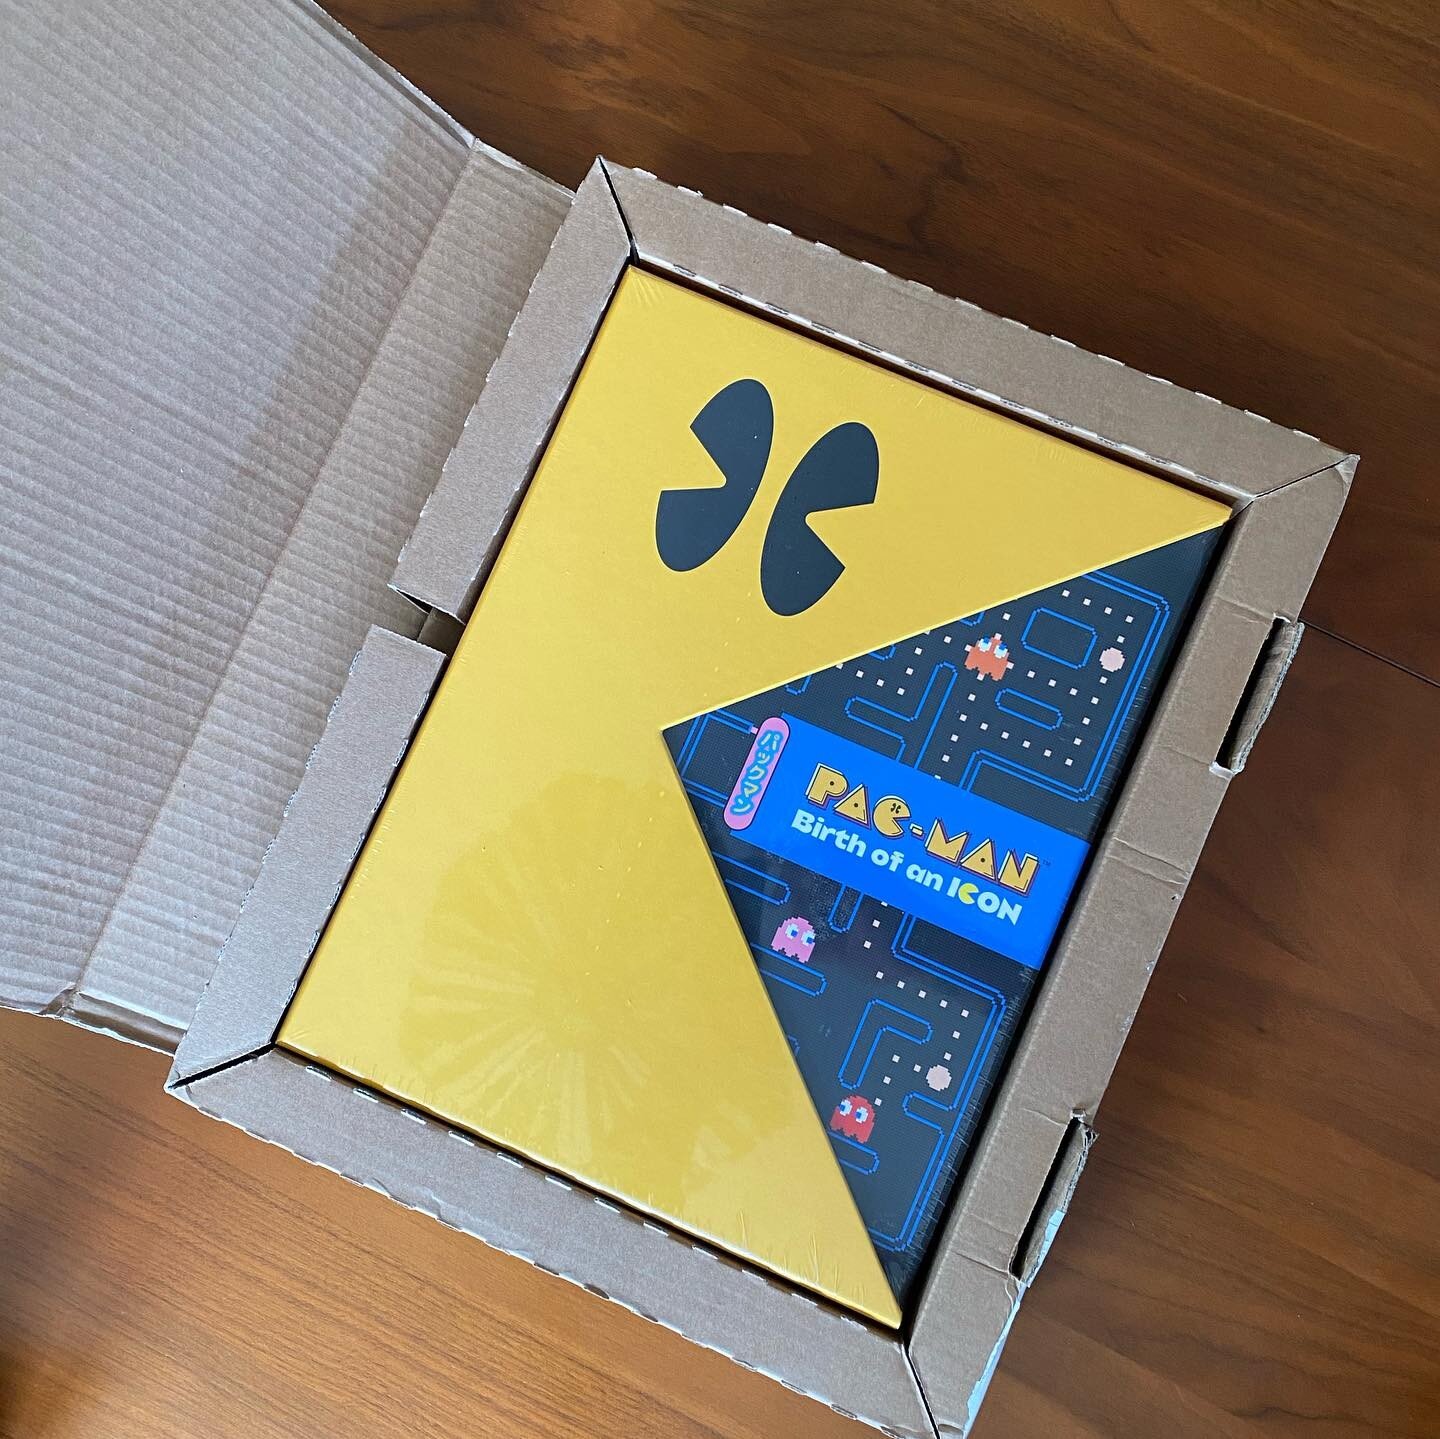 Just arrived the beautiful @cookandbecker &ldquo;Pac -Man: Birth of an Icon. A fantastic hardbound book, a 7&rdquo; Recording of Buckner and Garcia&rsquo;s &ldquo;Pac-Man Fever&rdquo;, and cool arcade token with Pac-Man on one side and ghost on the o